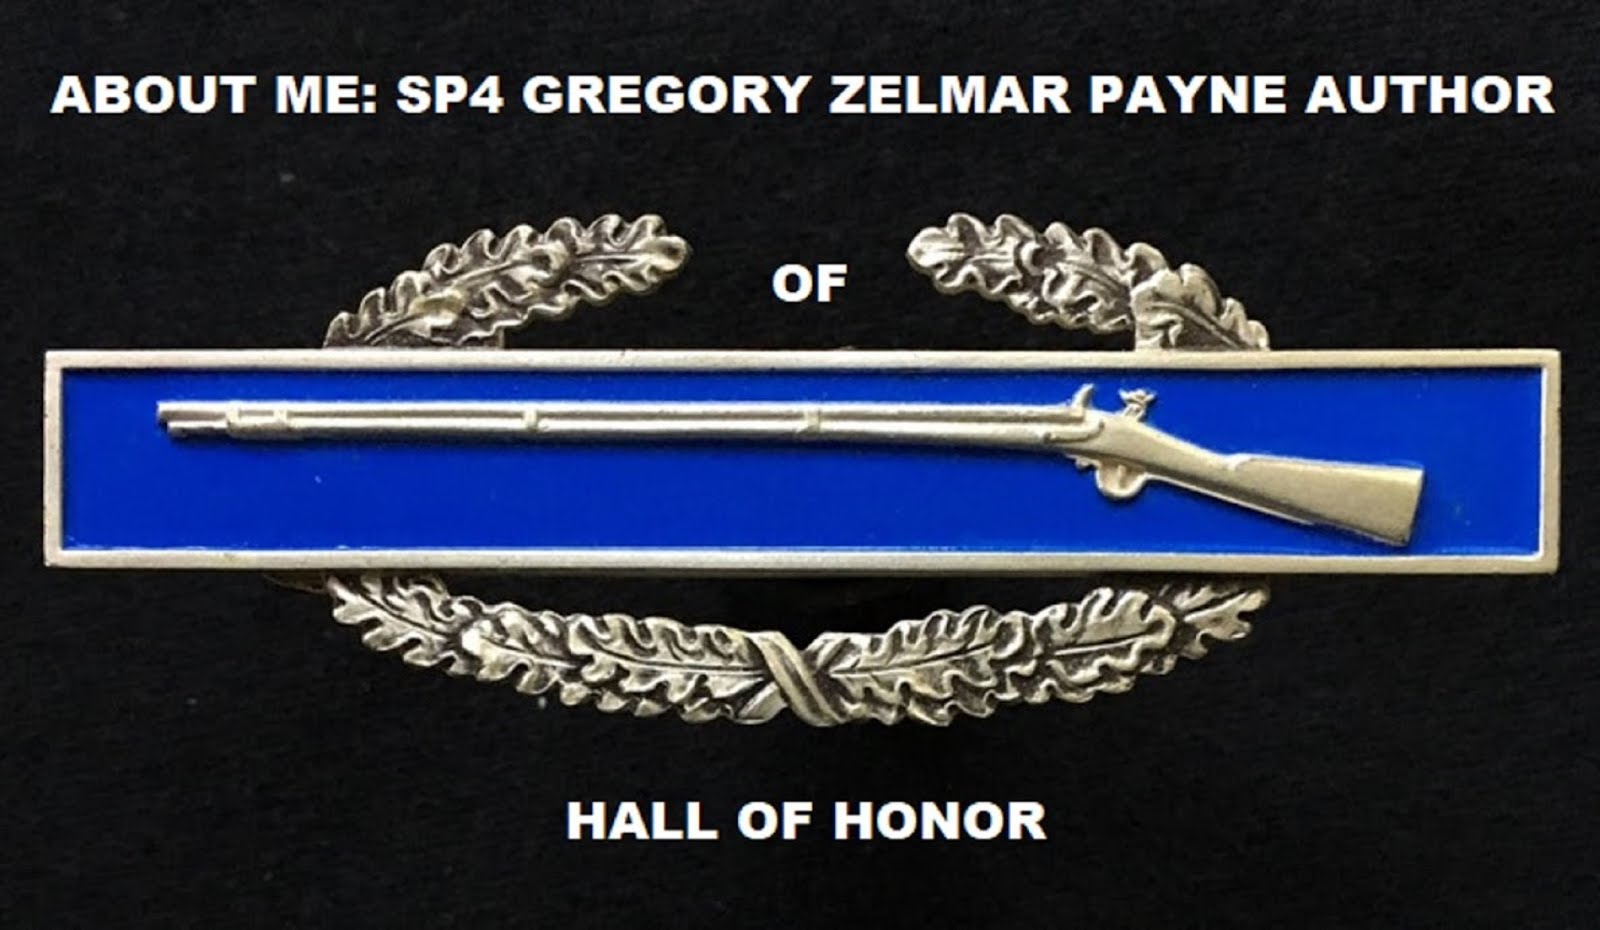 ABOUT ME:  SP4 GREGORY ZELMAR PAYNE AUTHOR OF HALL OF HONOR